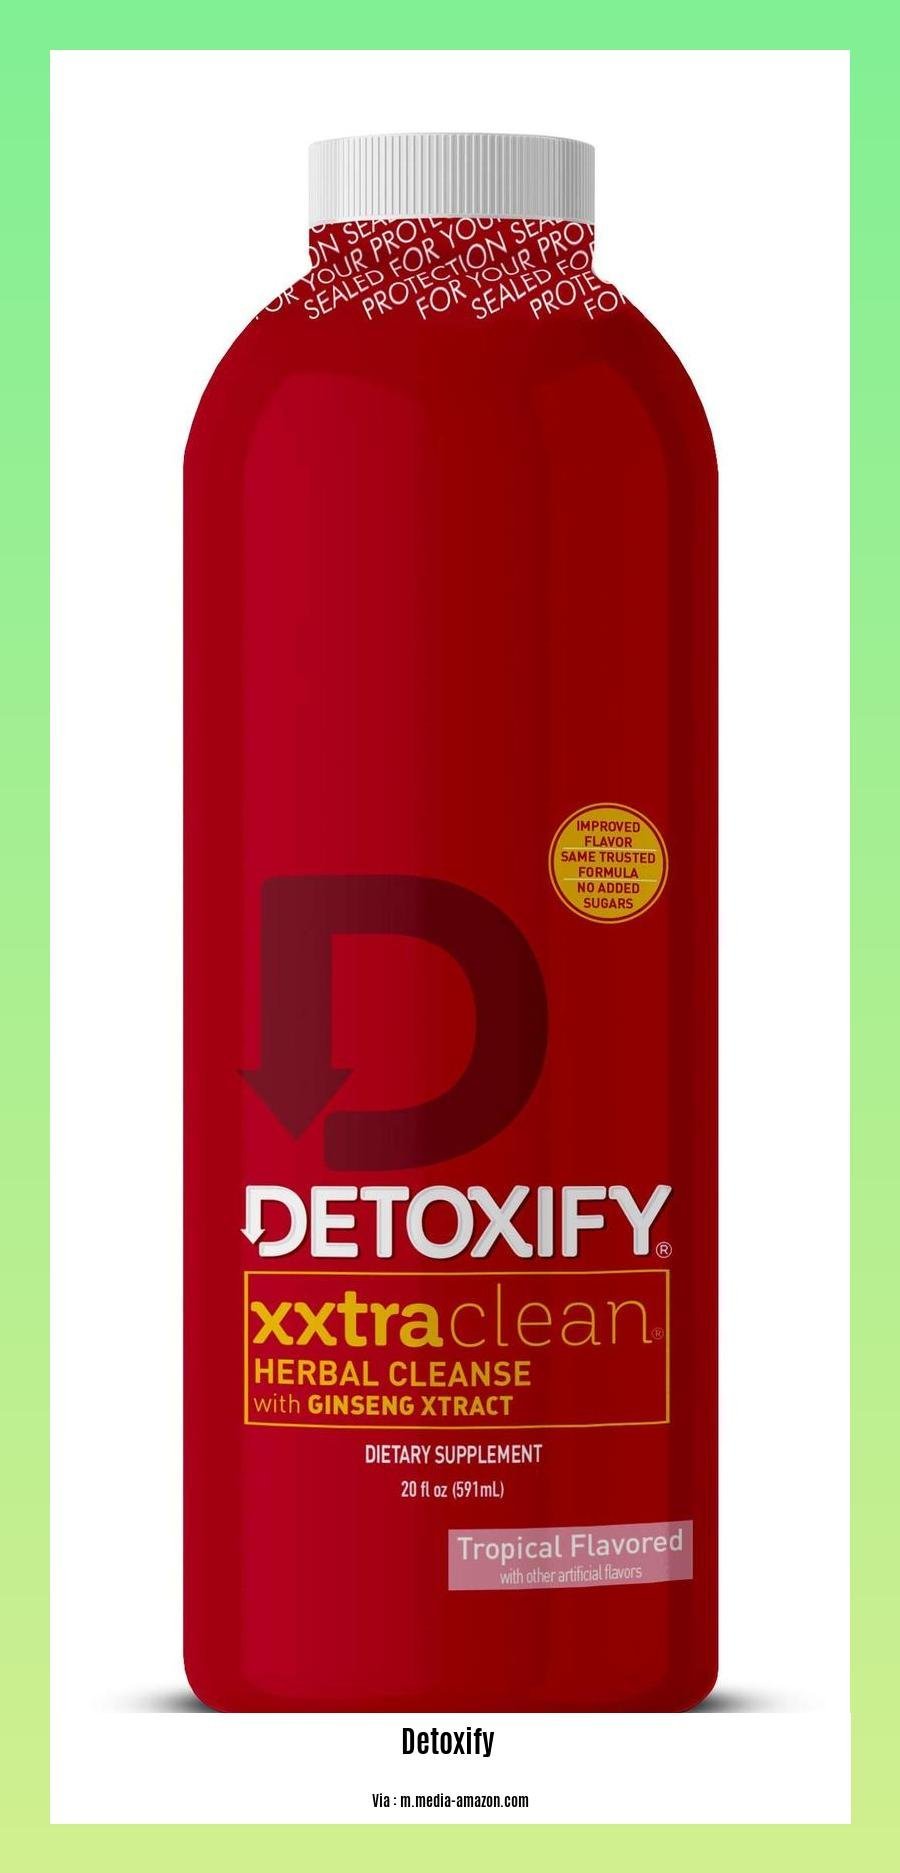 Detoxify ever clean 5 day cleansing program reviews